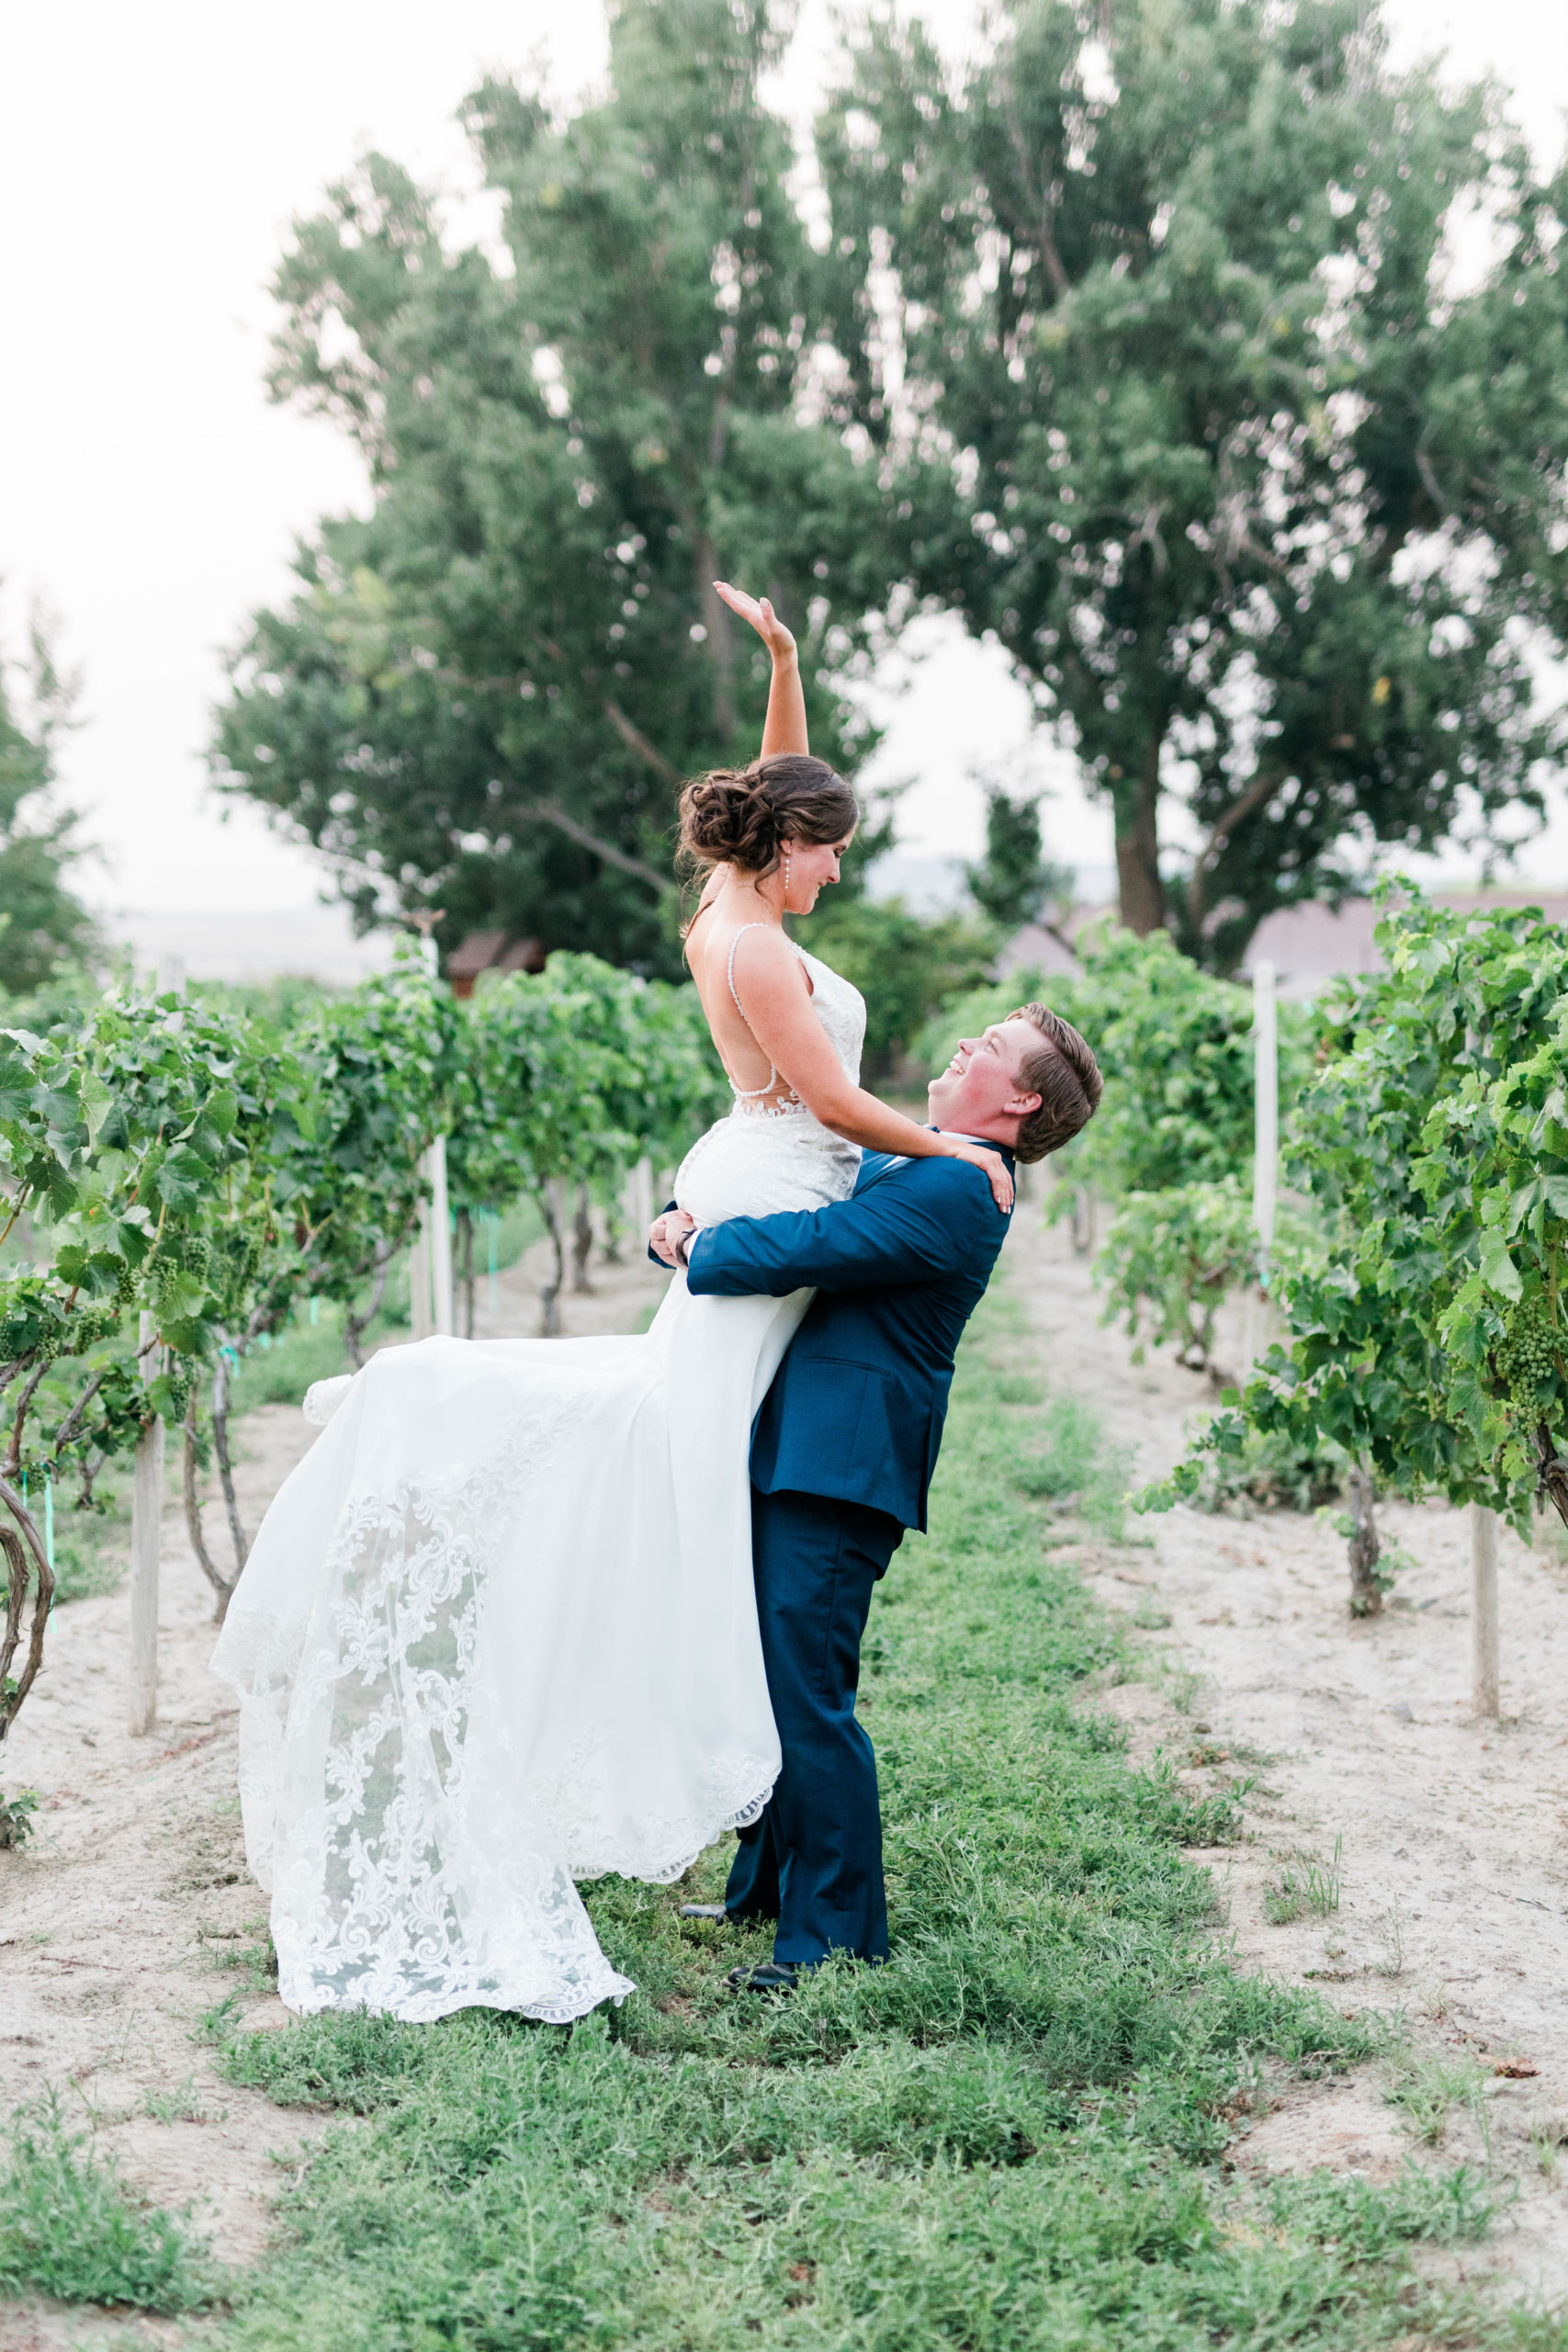 Boise vineyard wedding venue with groom picking up his bride from under her bottom as the bride throws a hand into the air